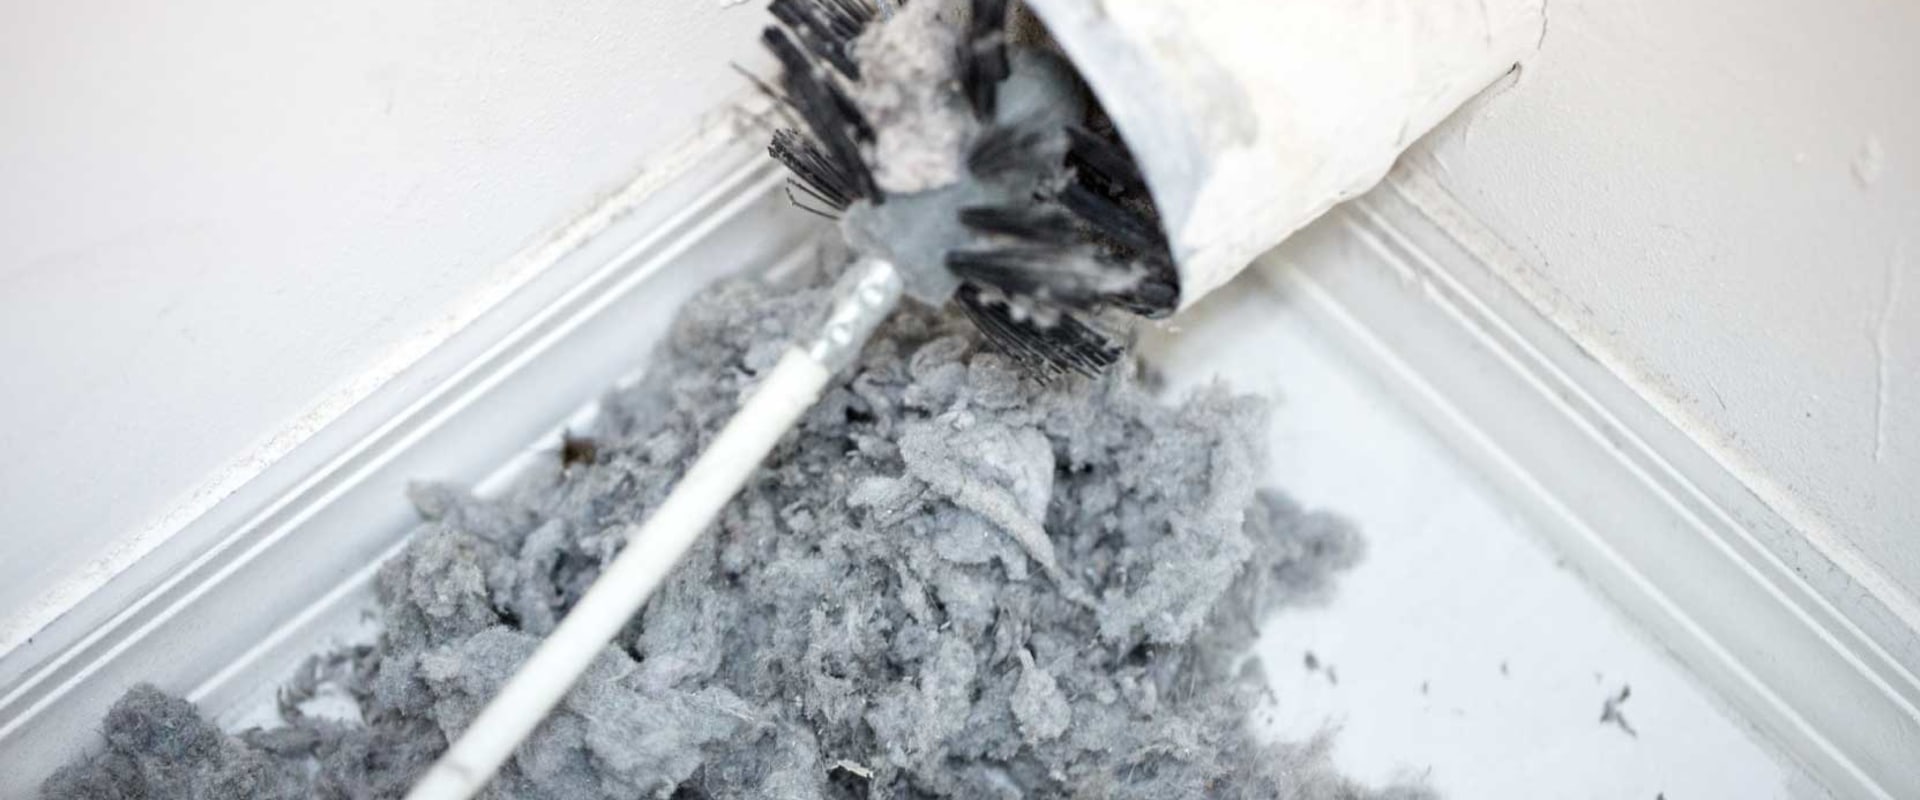 Do Dryer Vent Cleaning Companies Provide Follow-Up Services?